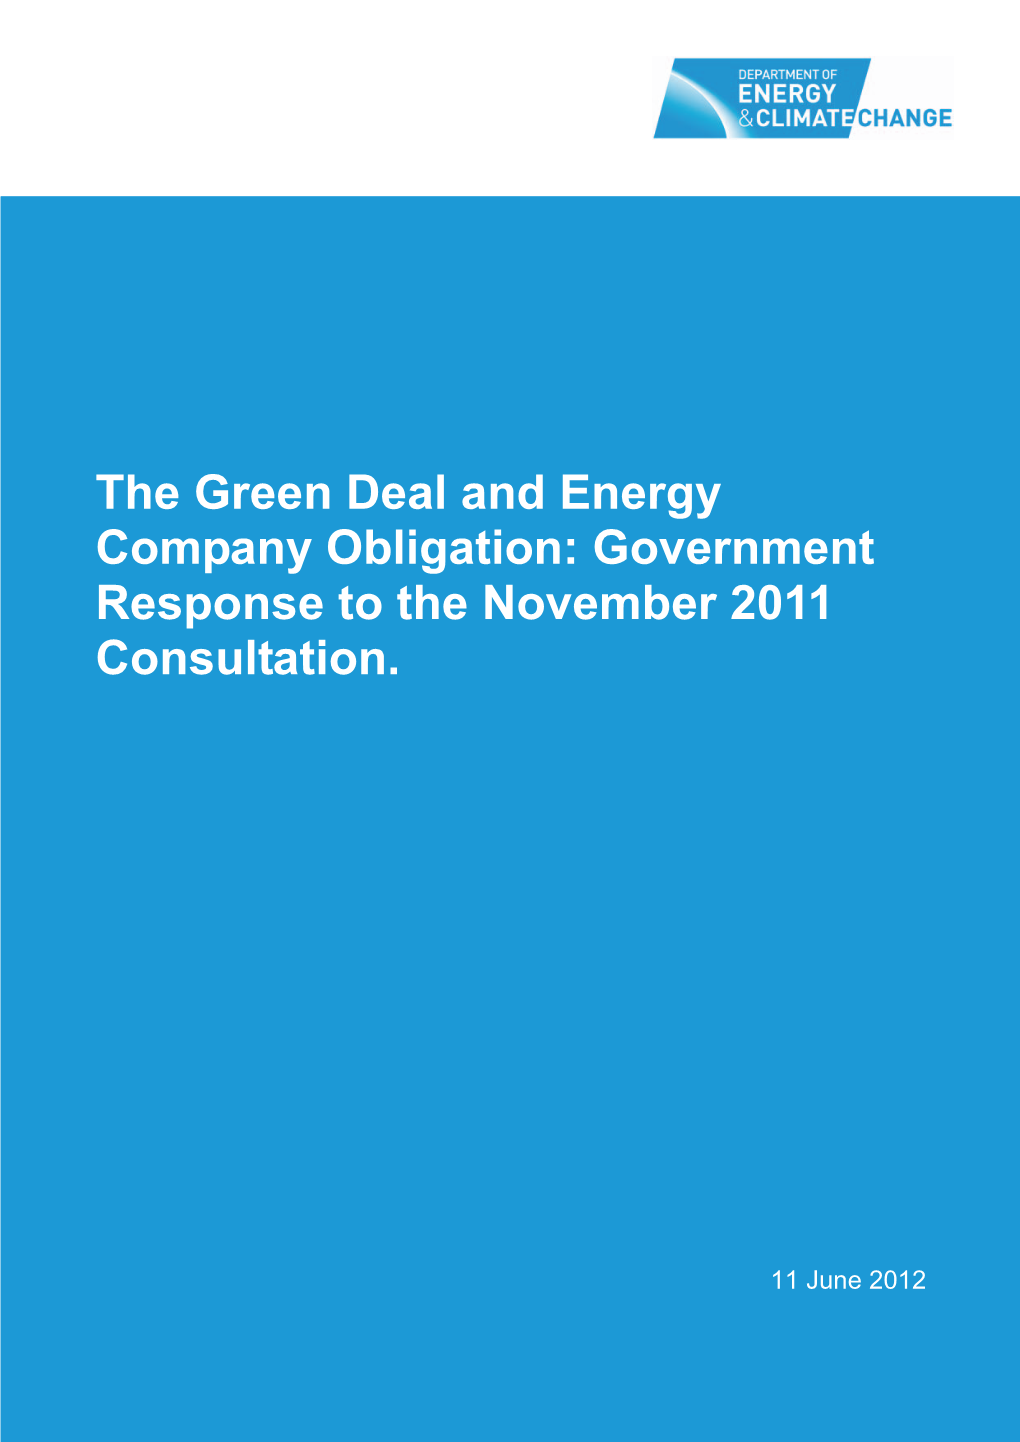 The Green Deal and Energy Company Obligation: Government Response to the November 2011 Consultation